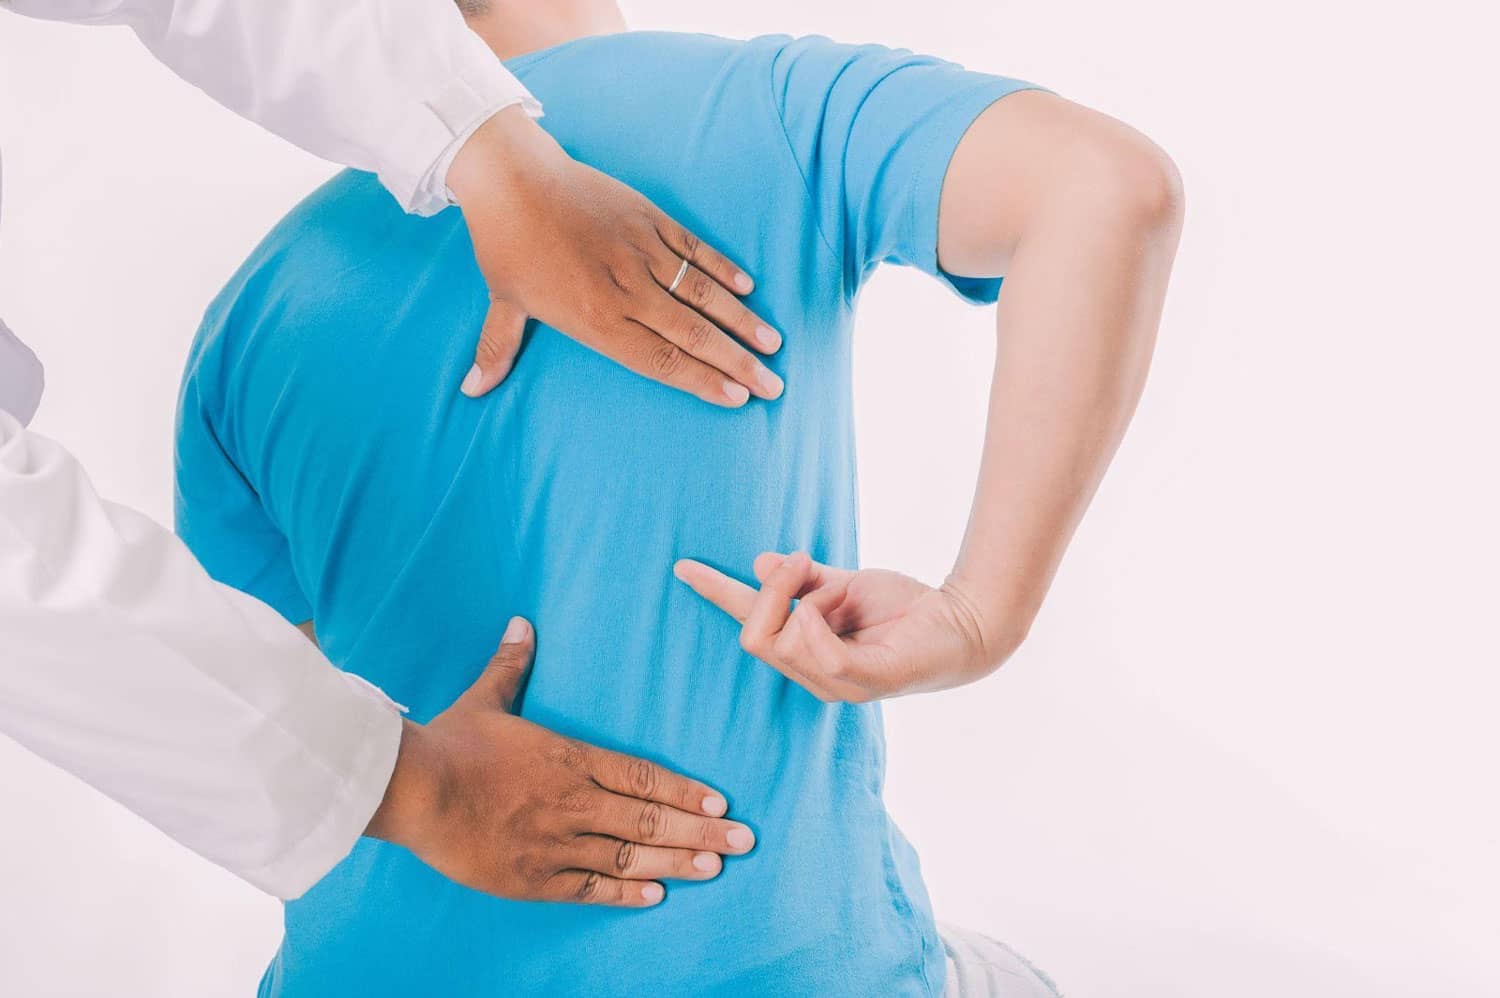 A man points to where his back hurts, during a chiropractic exam.